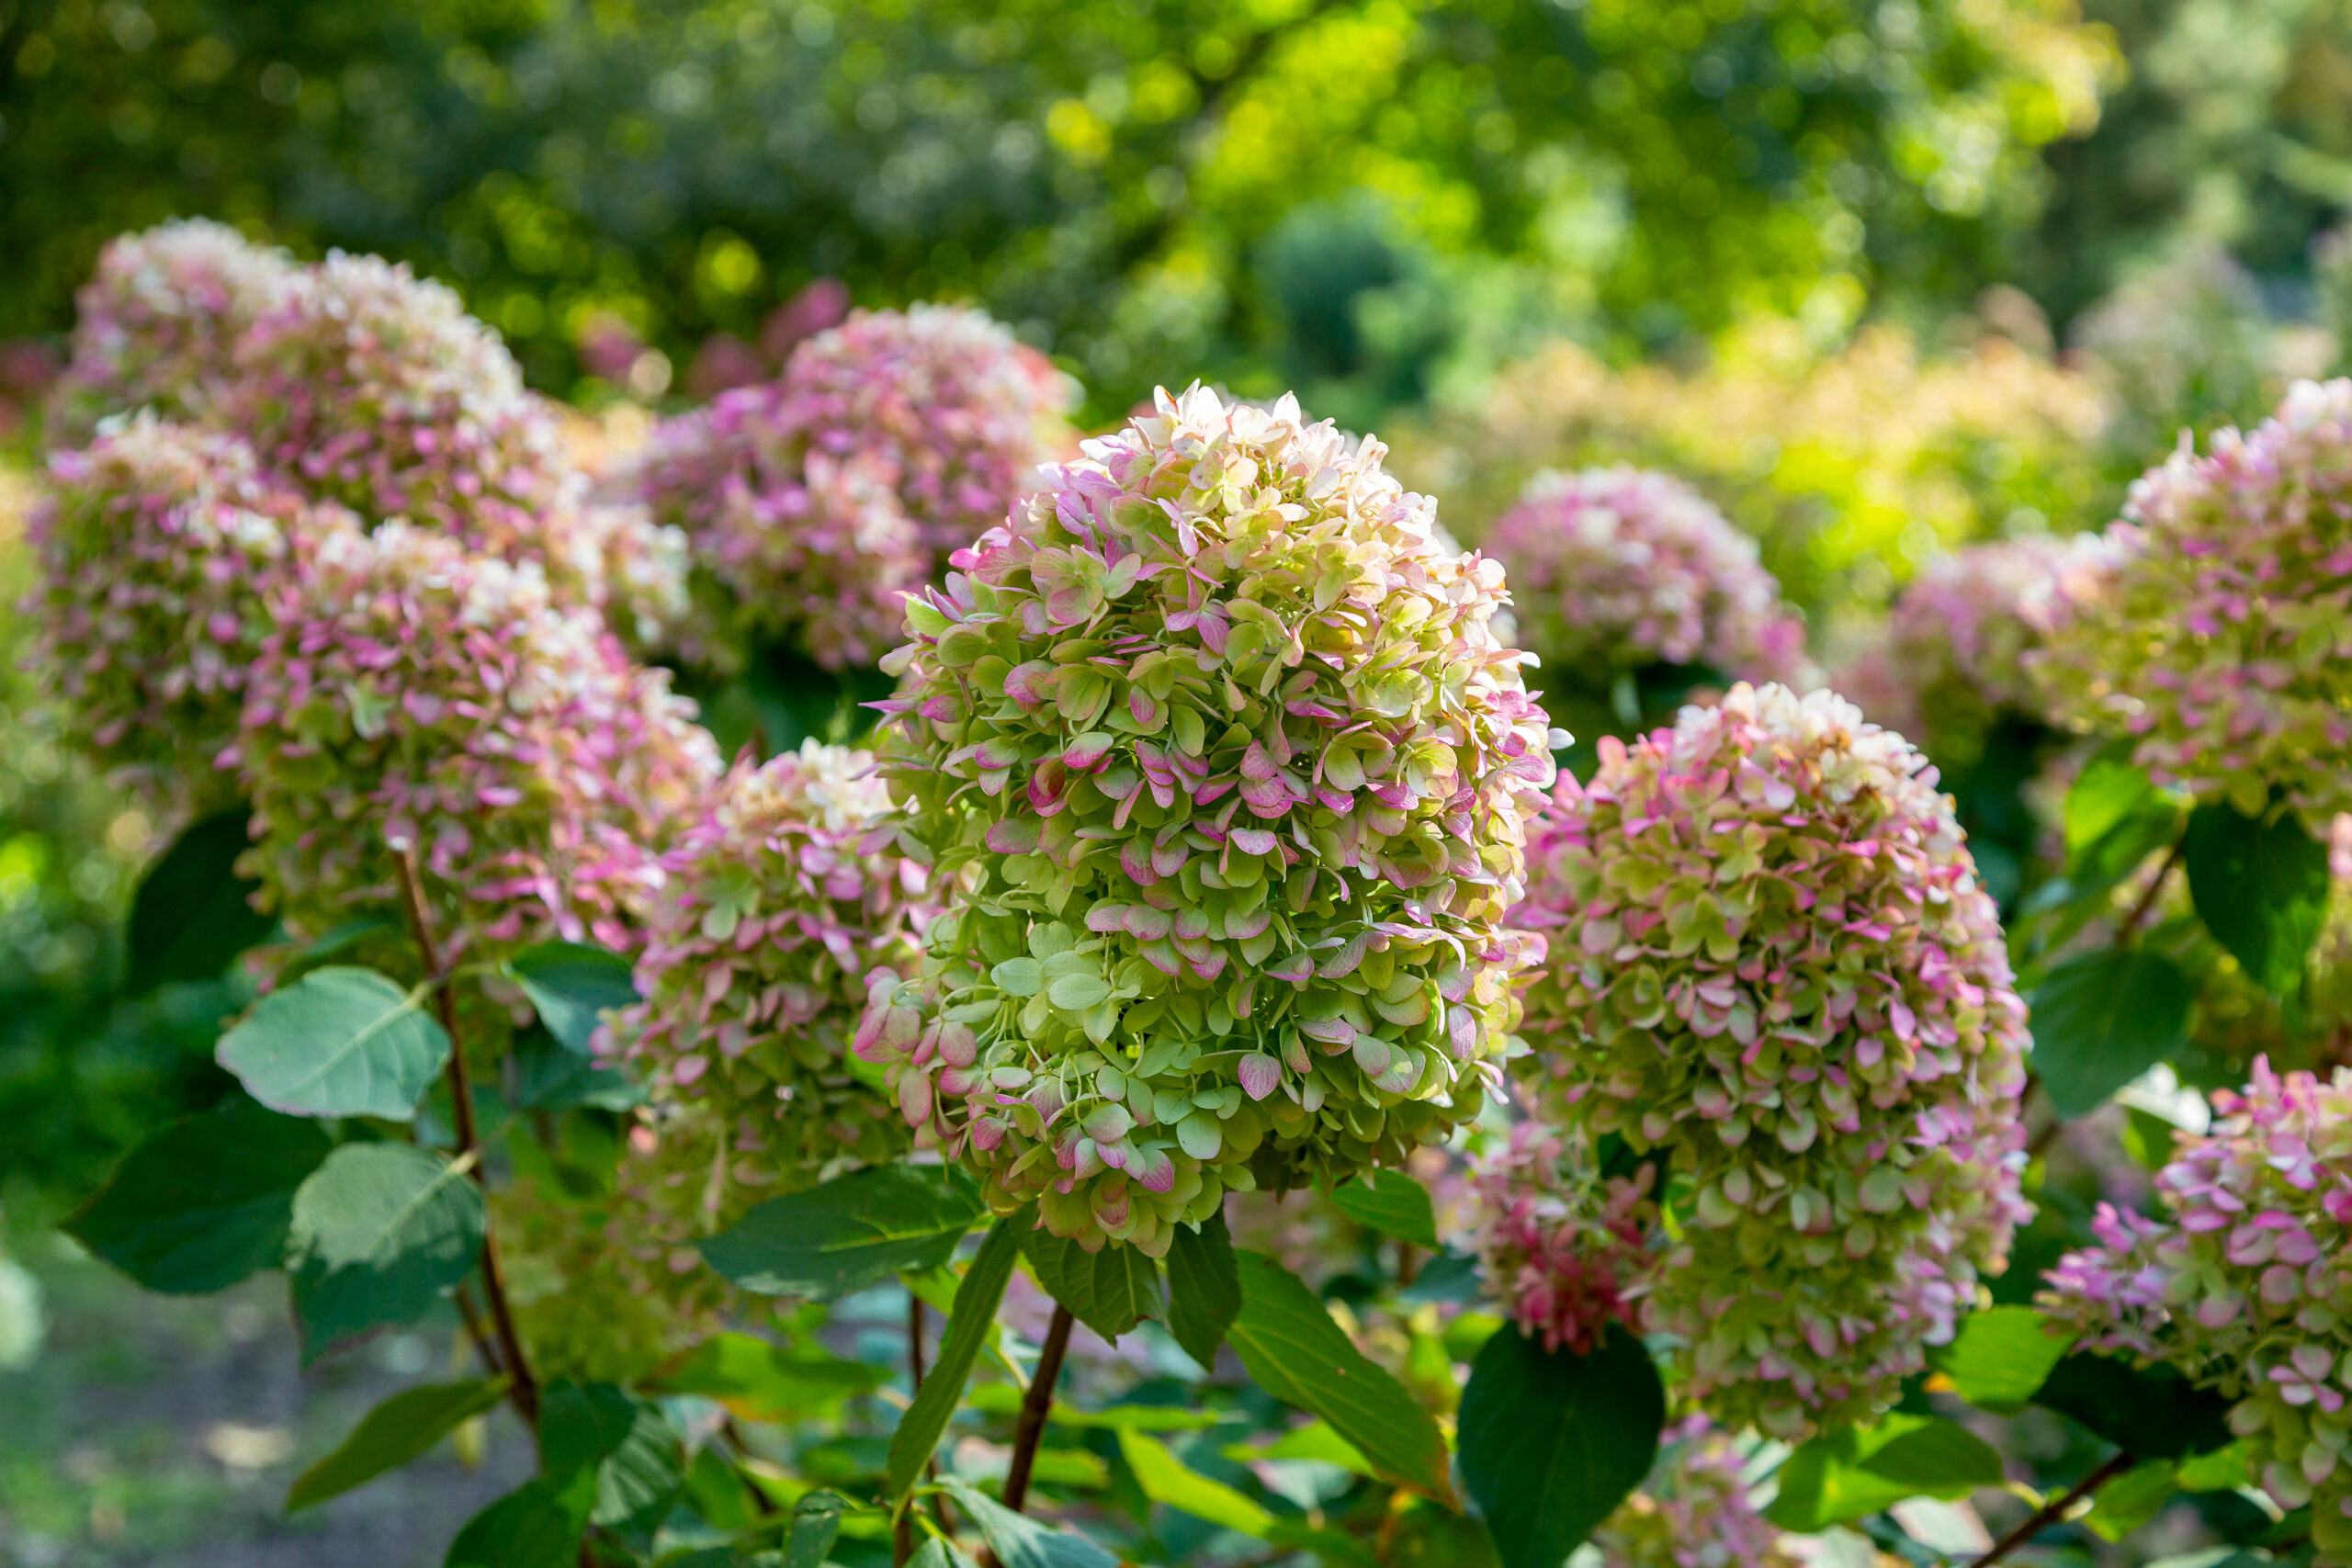 Hydrangea paniculata 'Polar Bear'. Large bulbous flower with white and pink.